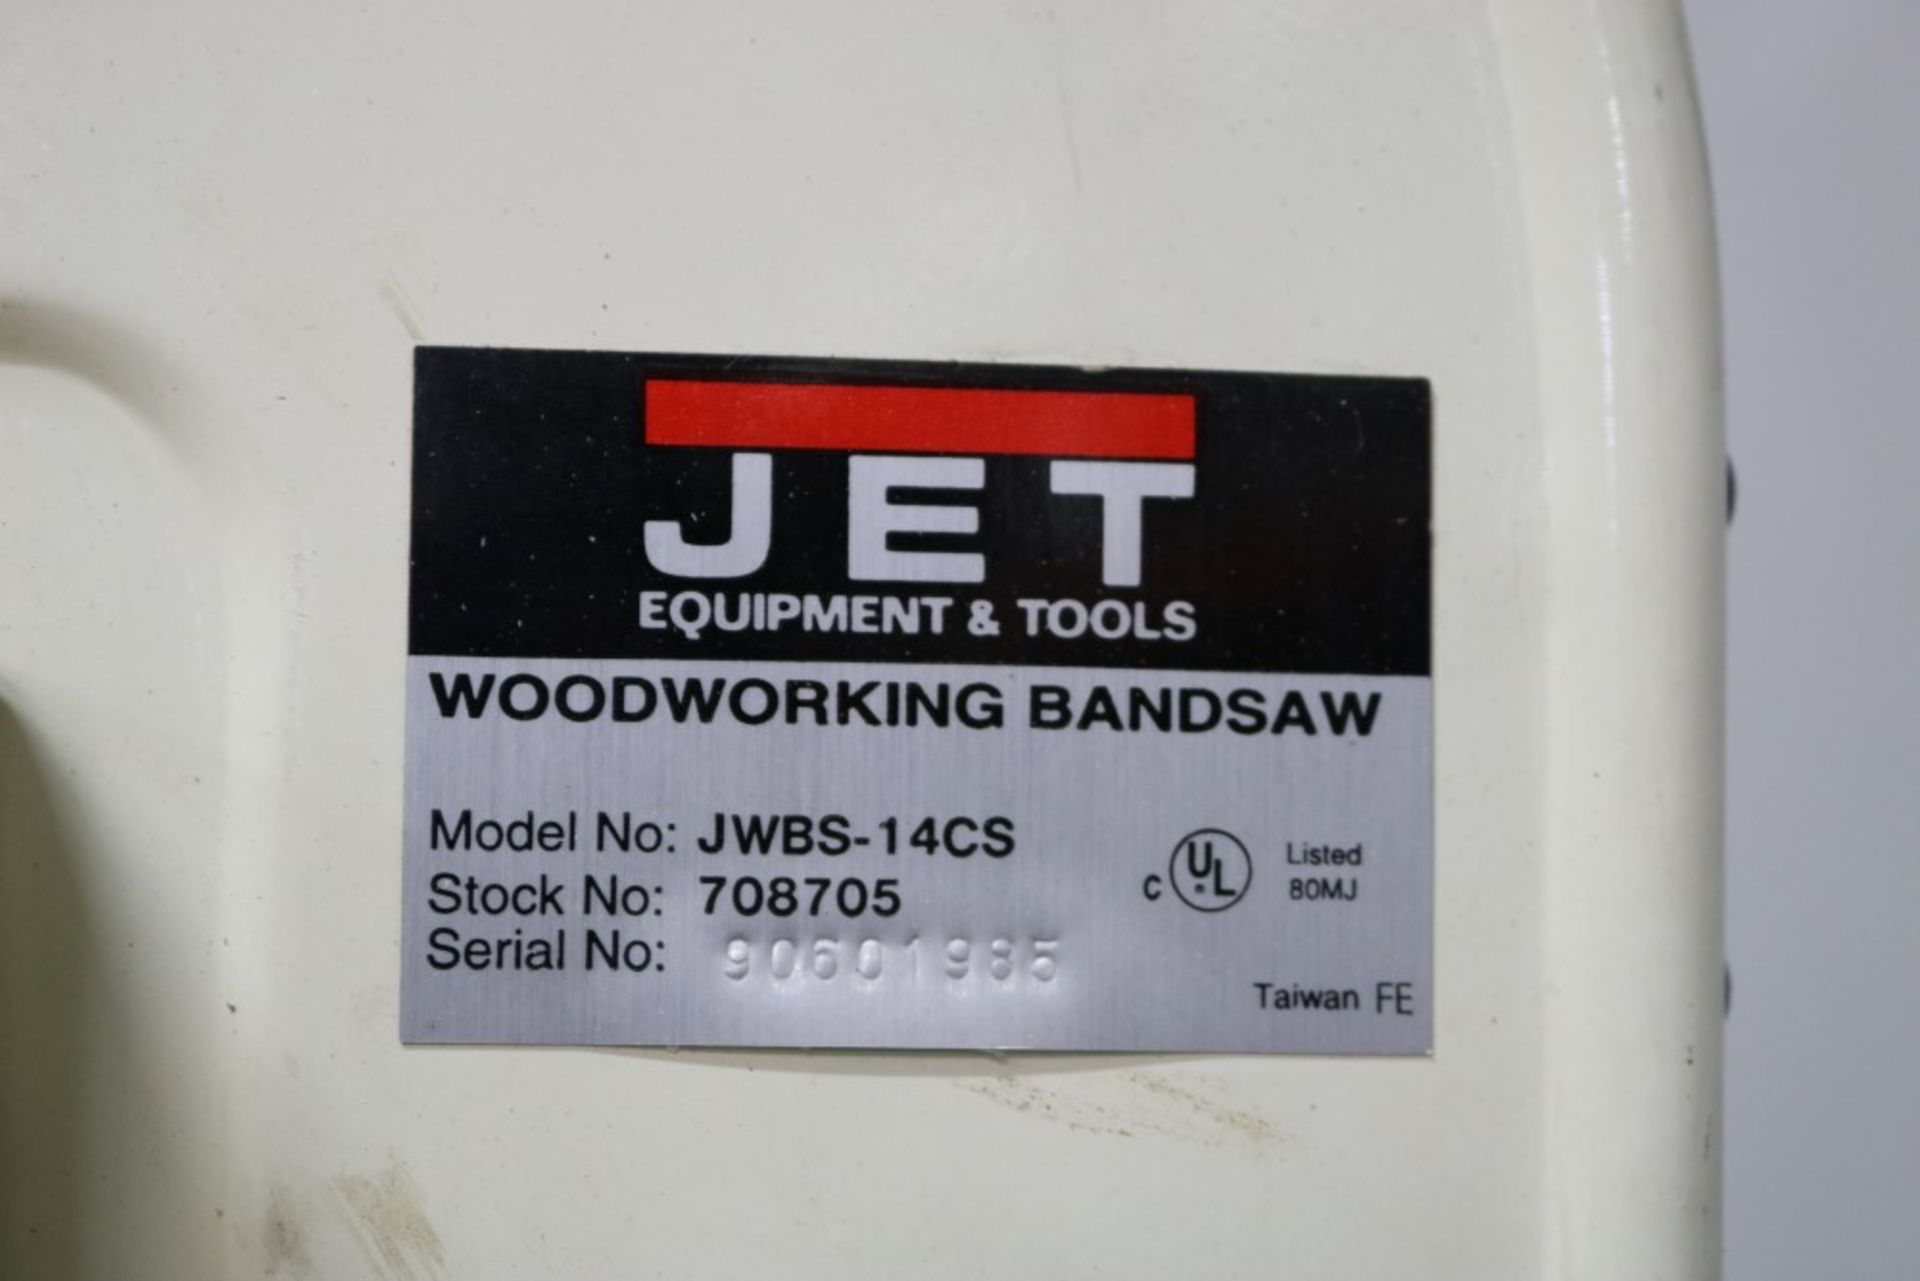 Jet Woodworking Band Saw, Model JWBS-14CS - Image 2 of 5